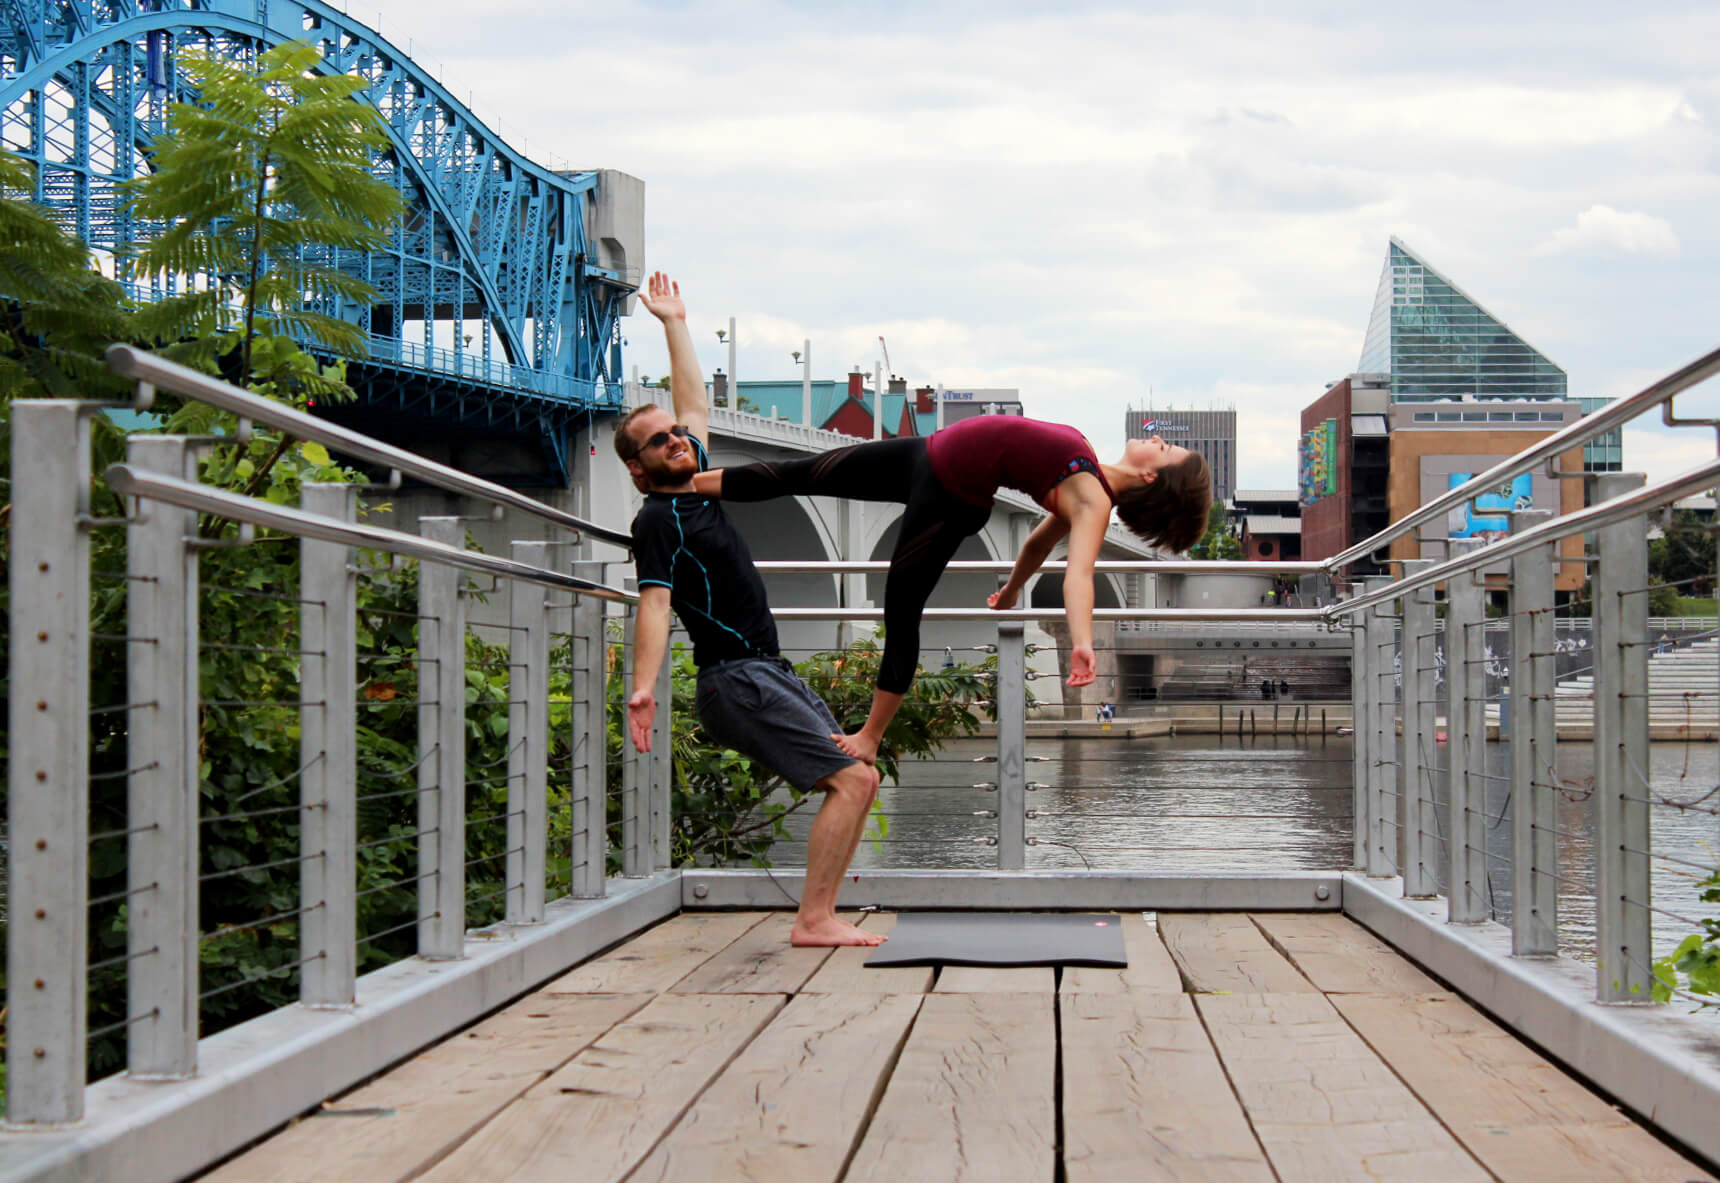 lydia and husband nick doing acro yoga by the walking bridge in chattanooga